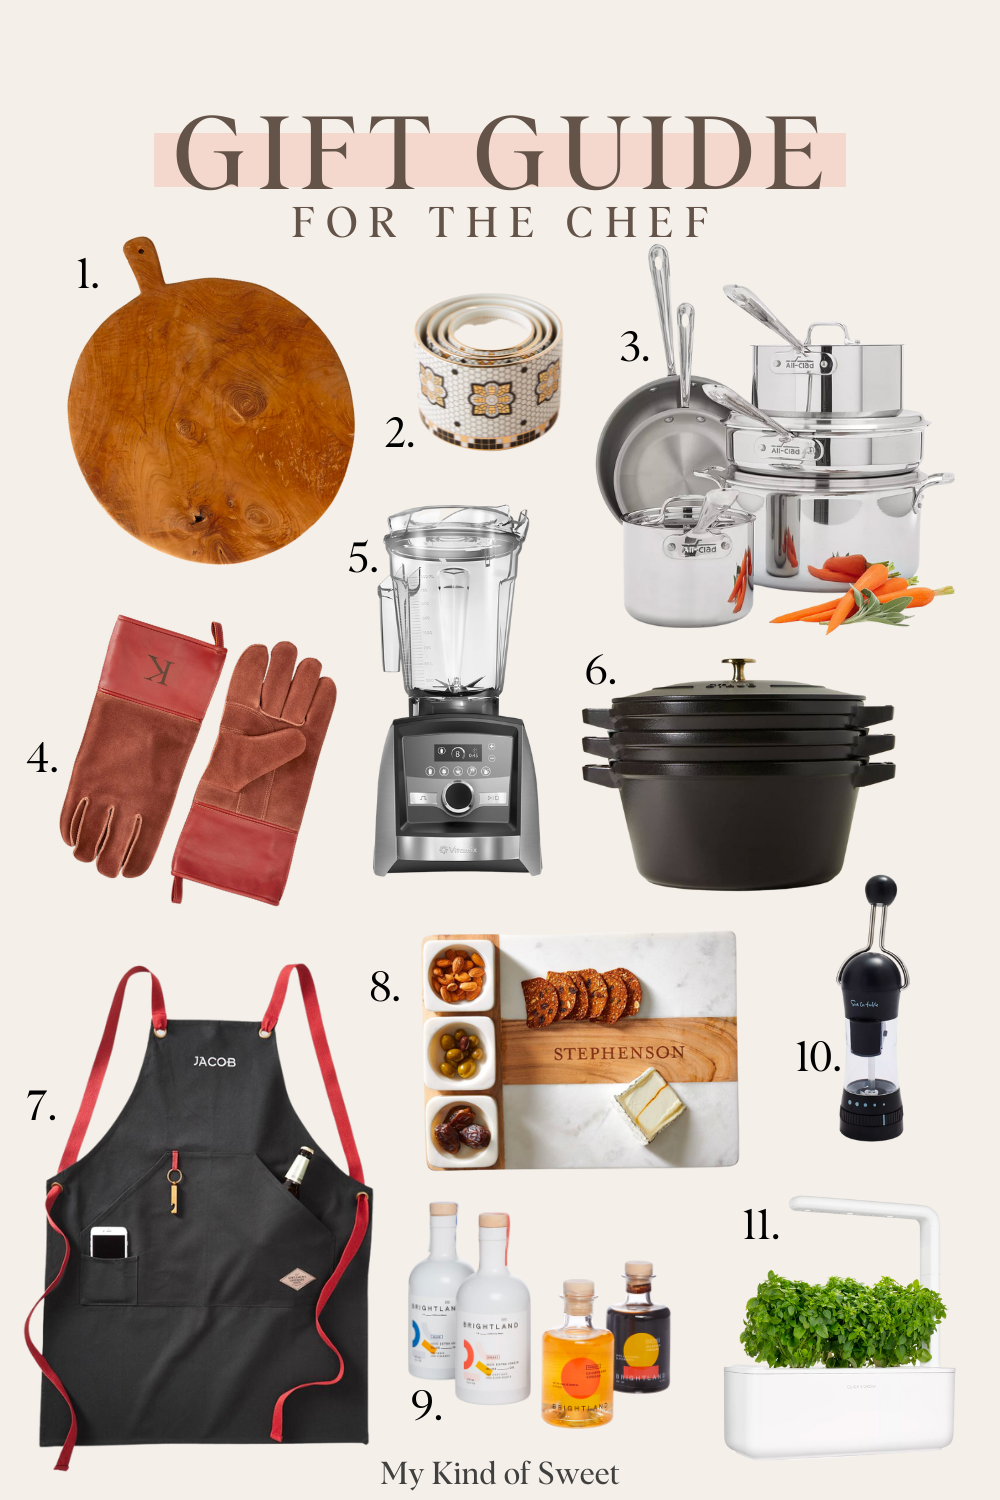 Best Gifts for the Chef  Christmas Gift Guide - 31 Daily